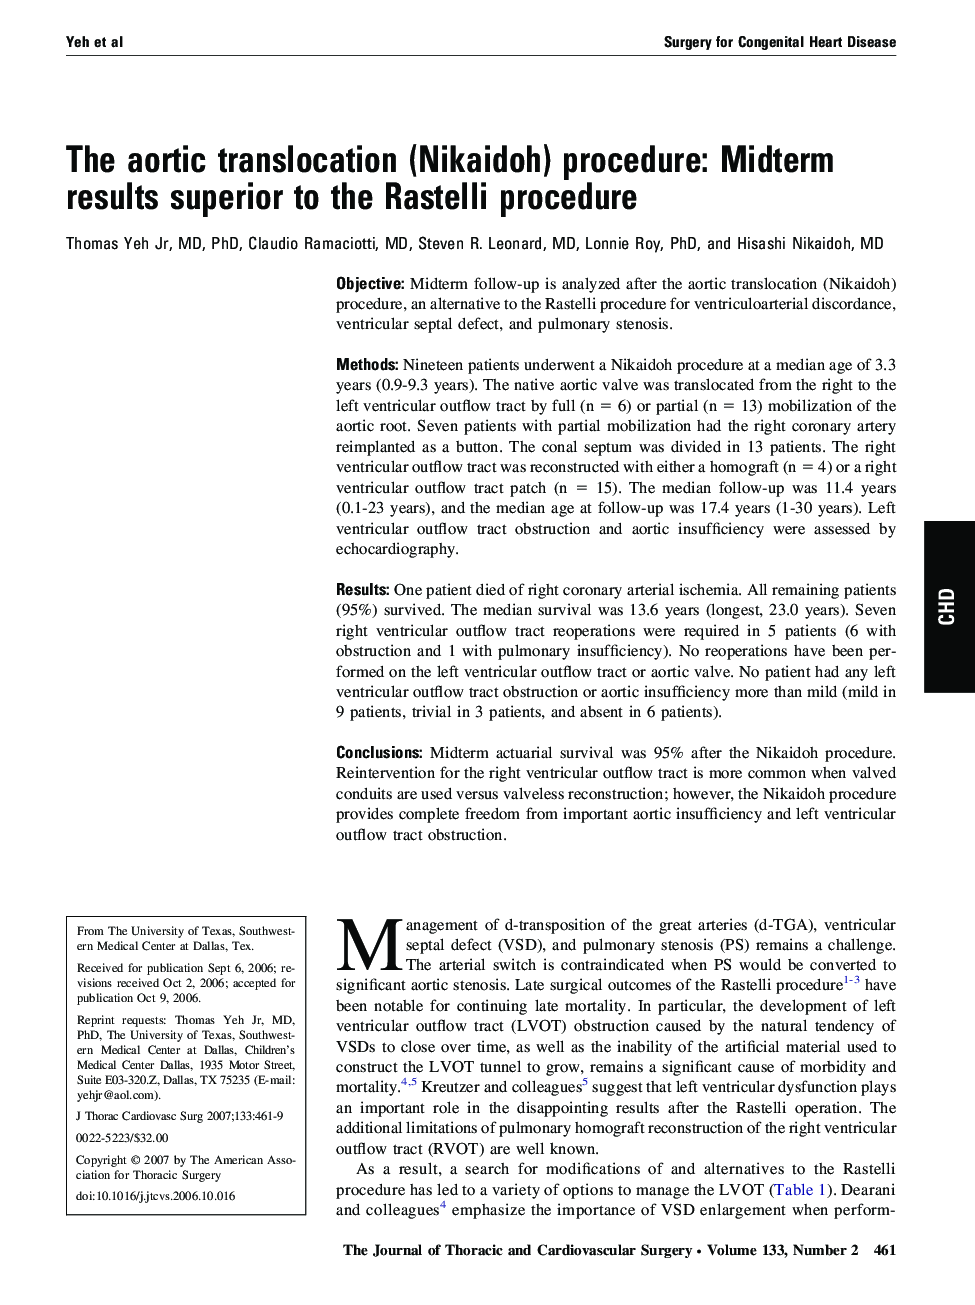 The aortic translocation (Nikaidoh) procedure: Midterm results superior to the Rastelli procedure